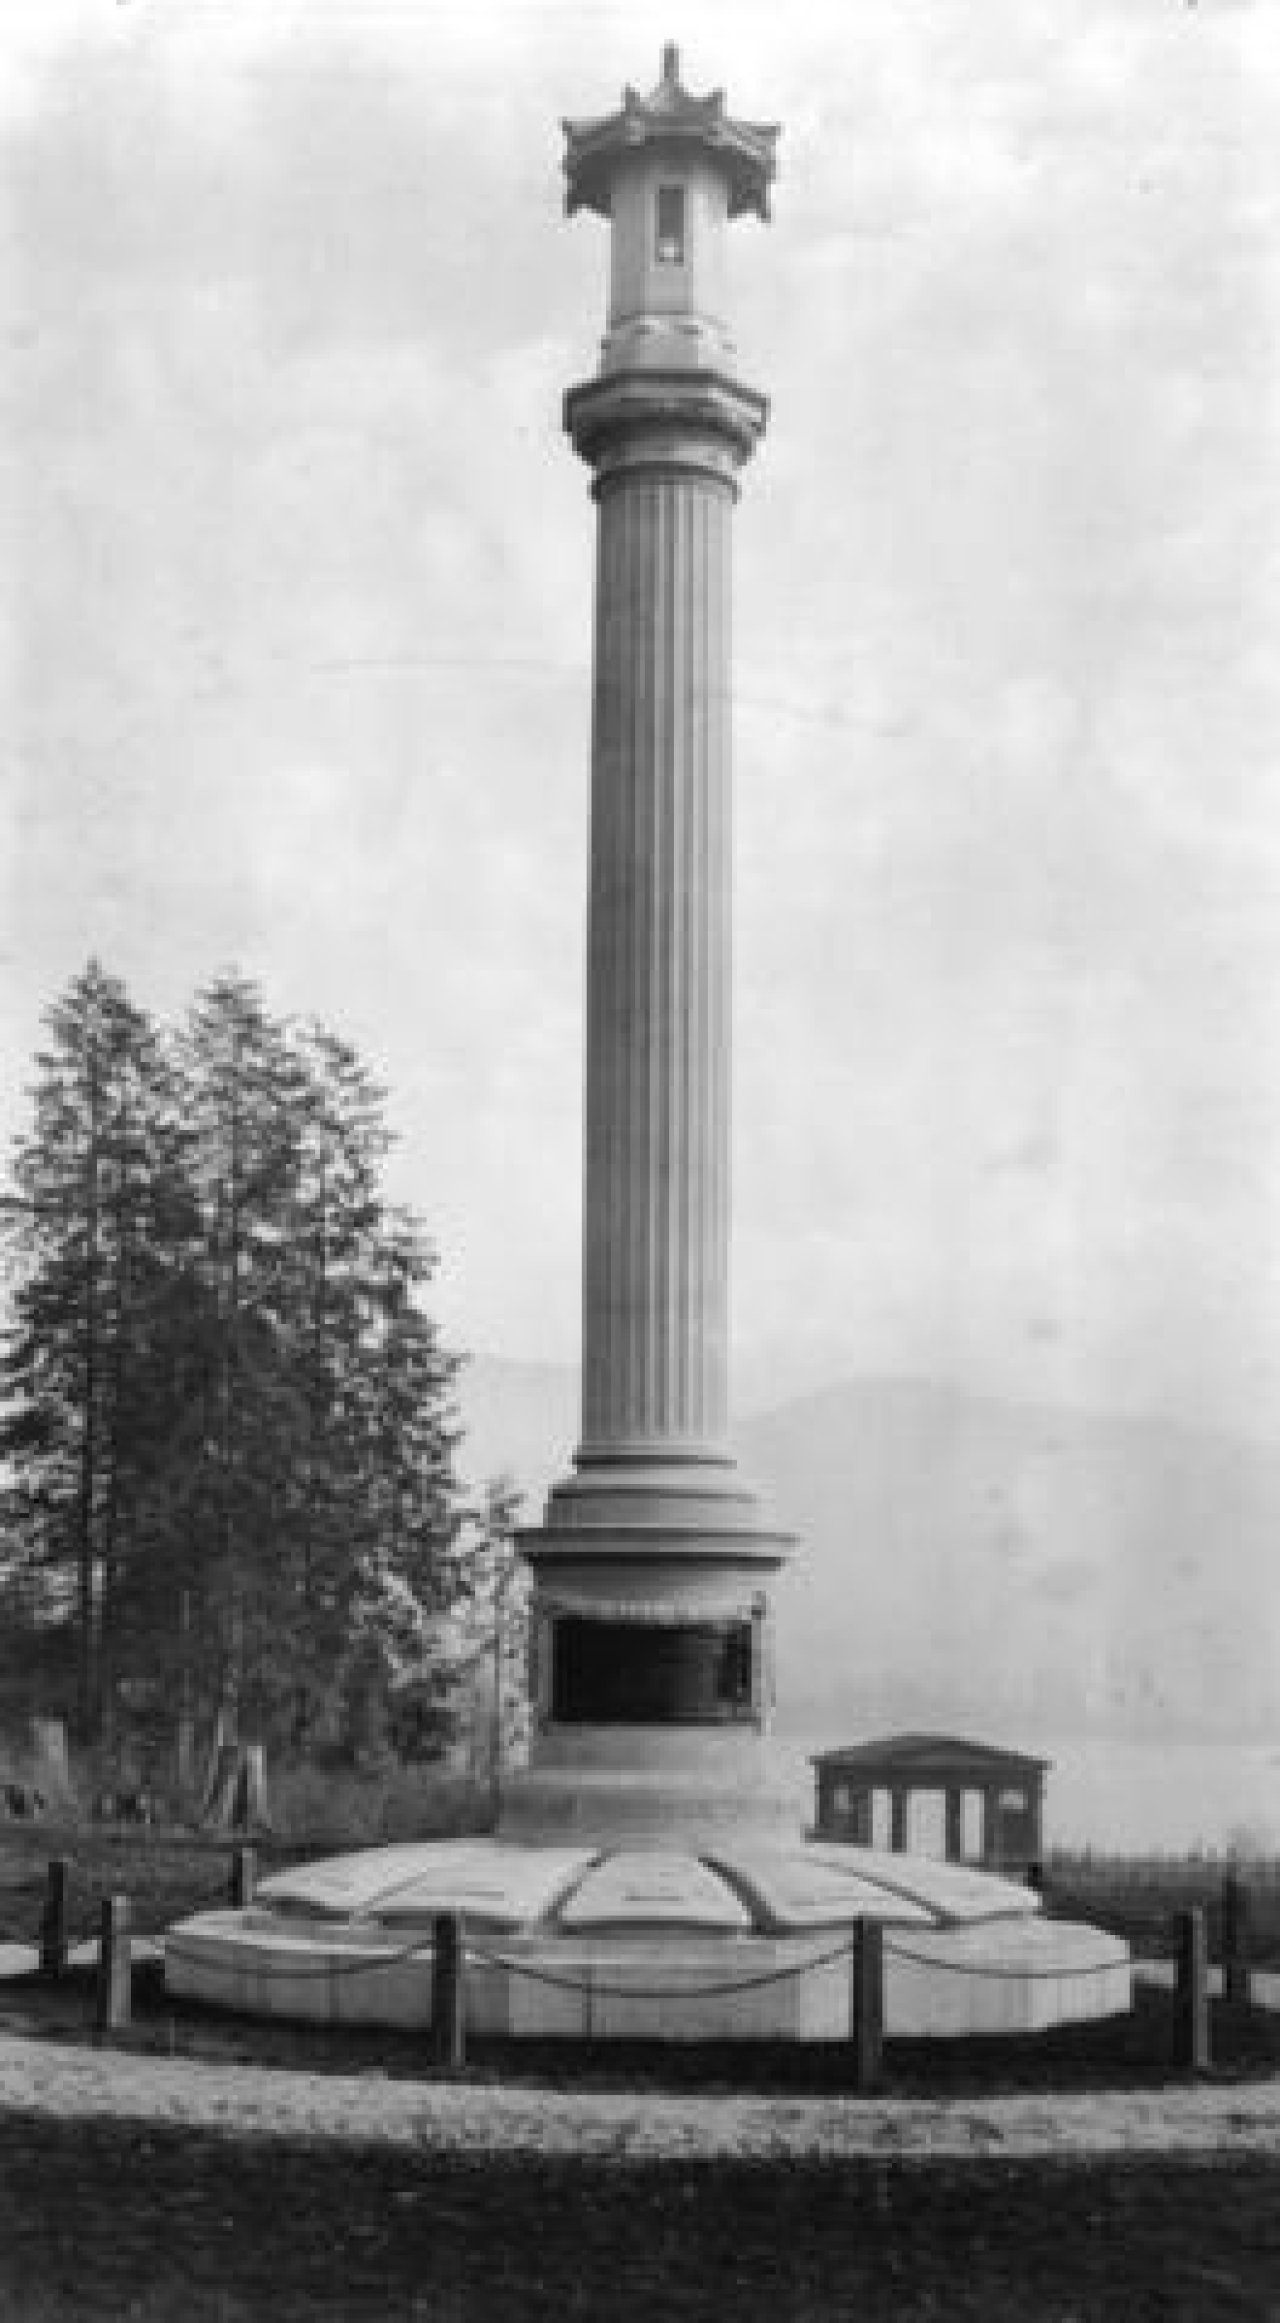 Japanese Canadian War Memorial in 1920(?) with Lumberman's Arch in the Background. Source: City of Vancouver Archives Mon P9